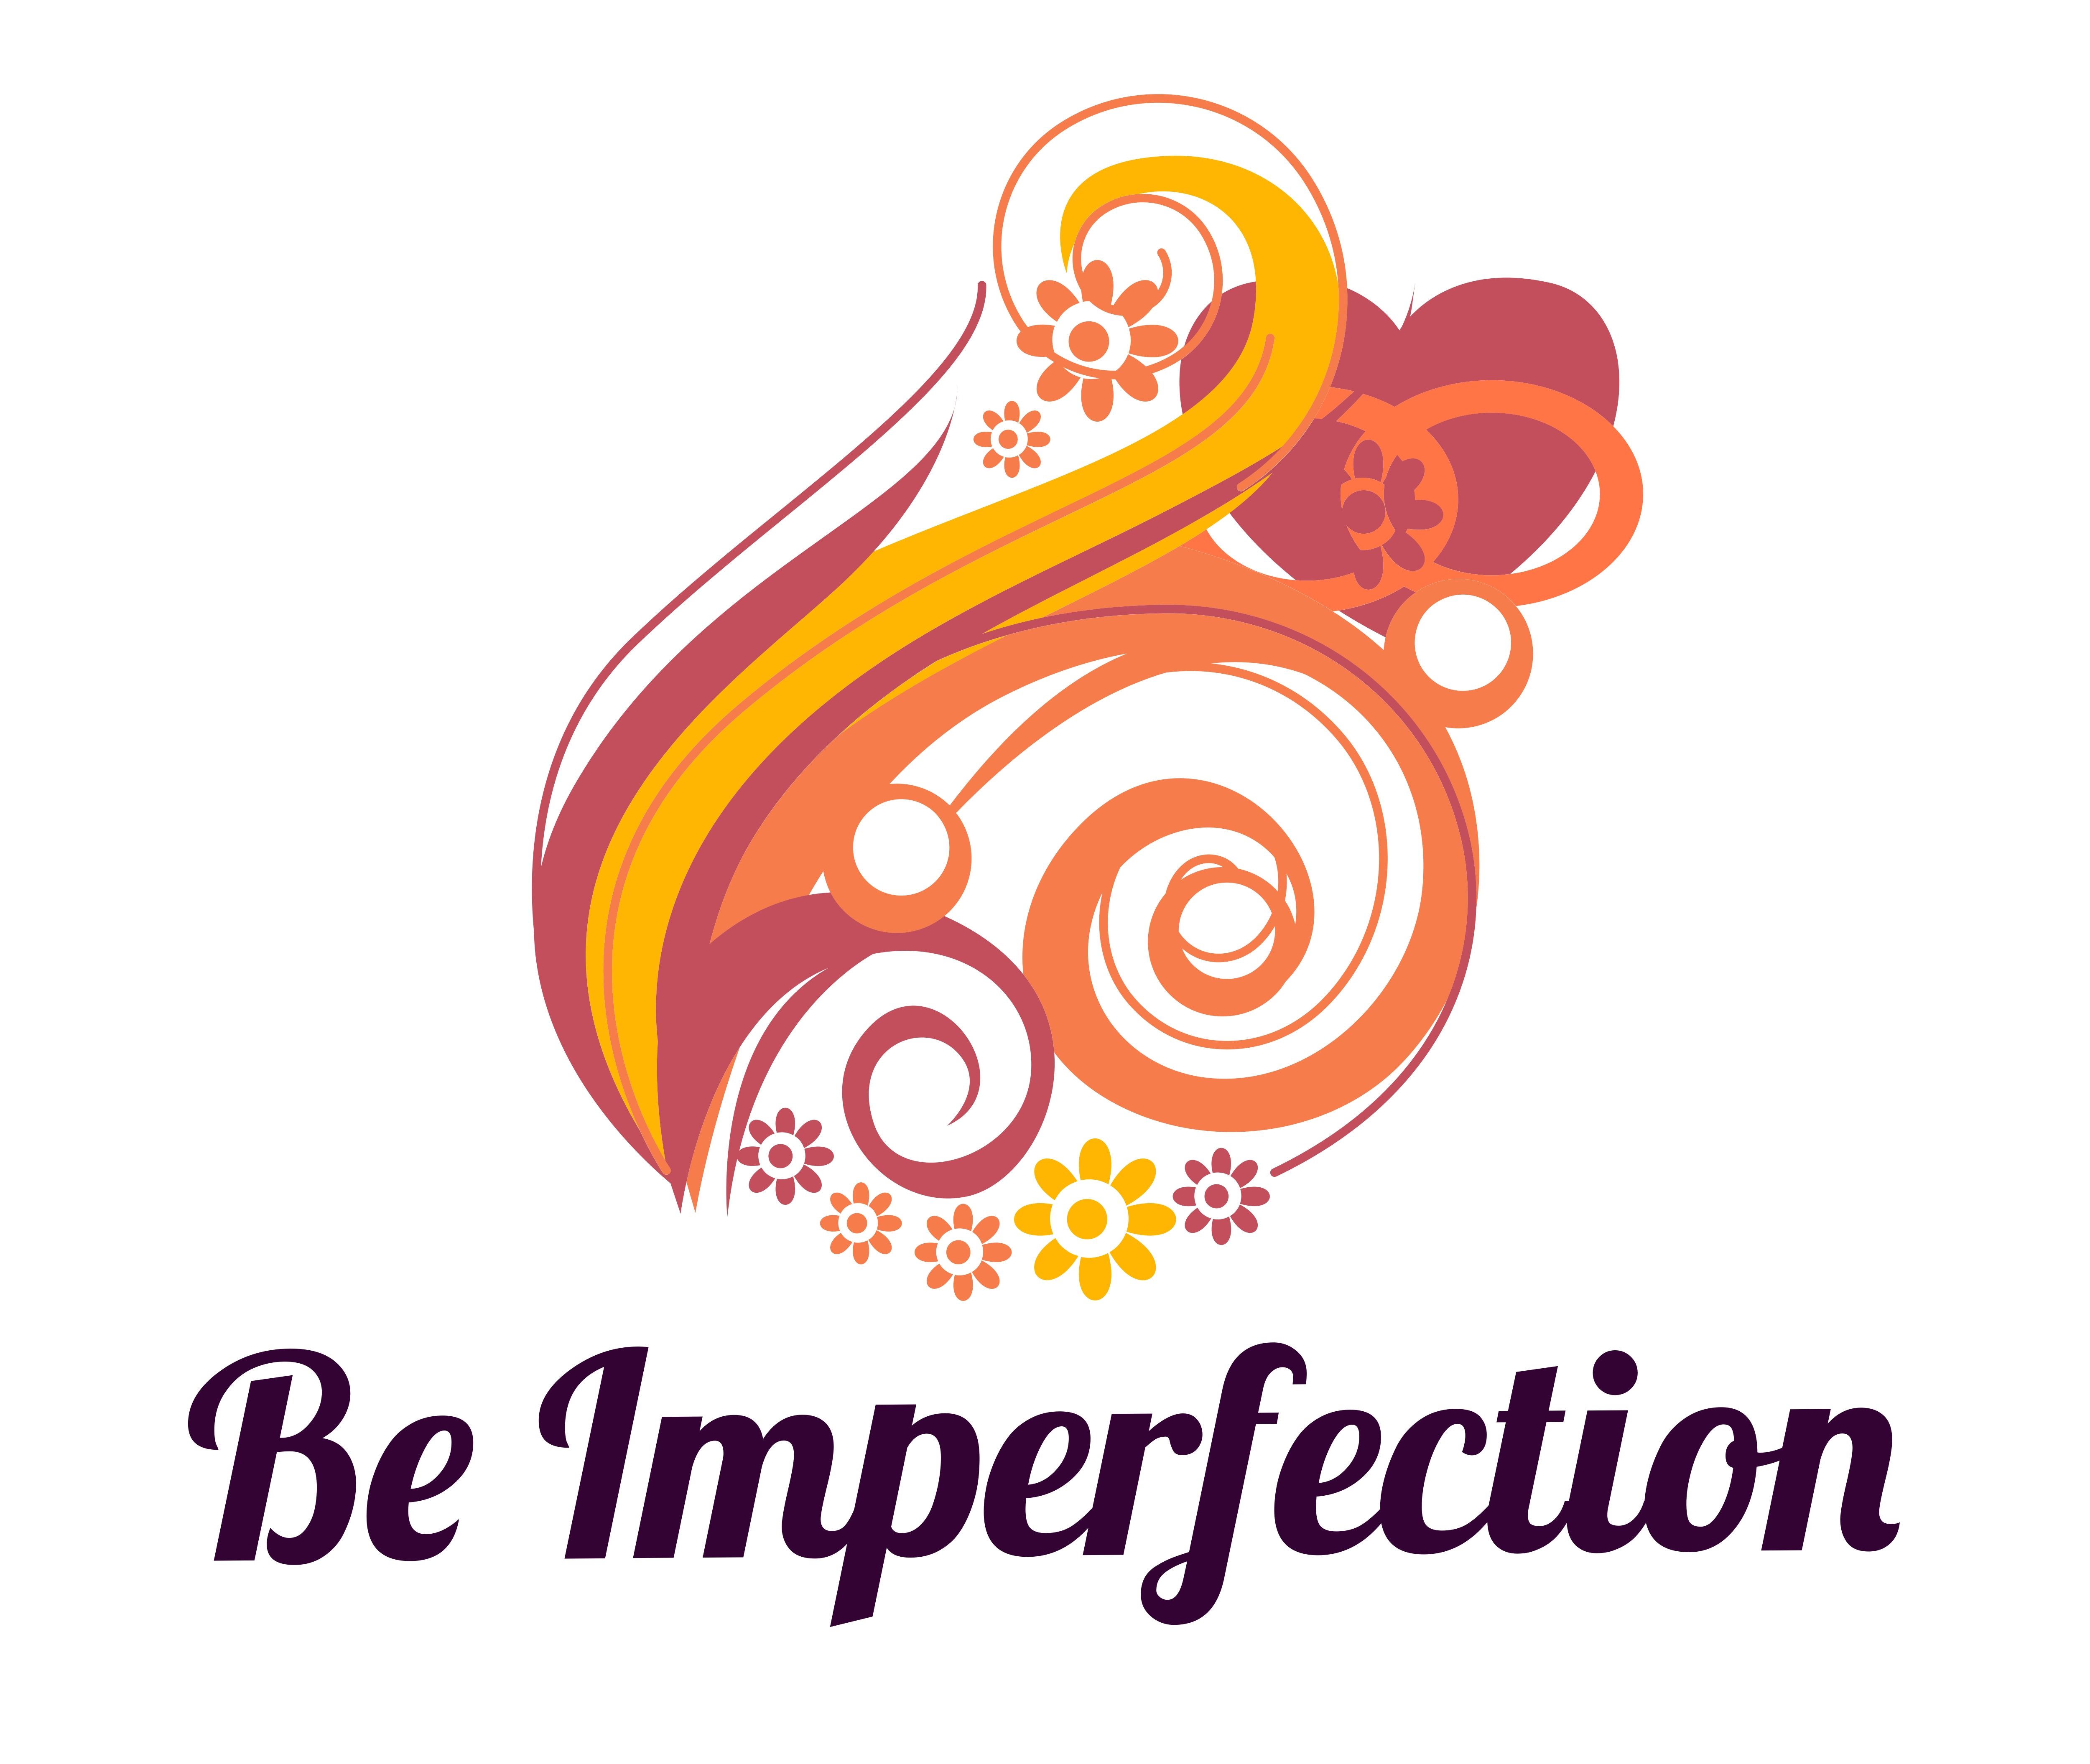 Be Imperfection